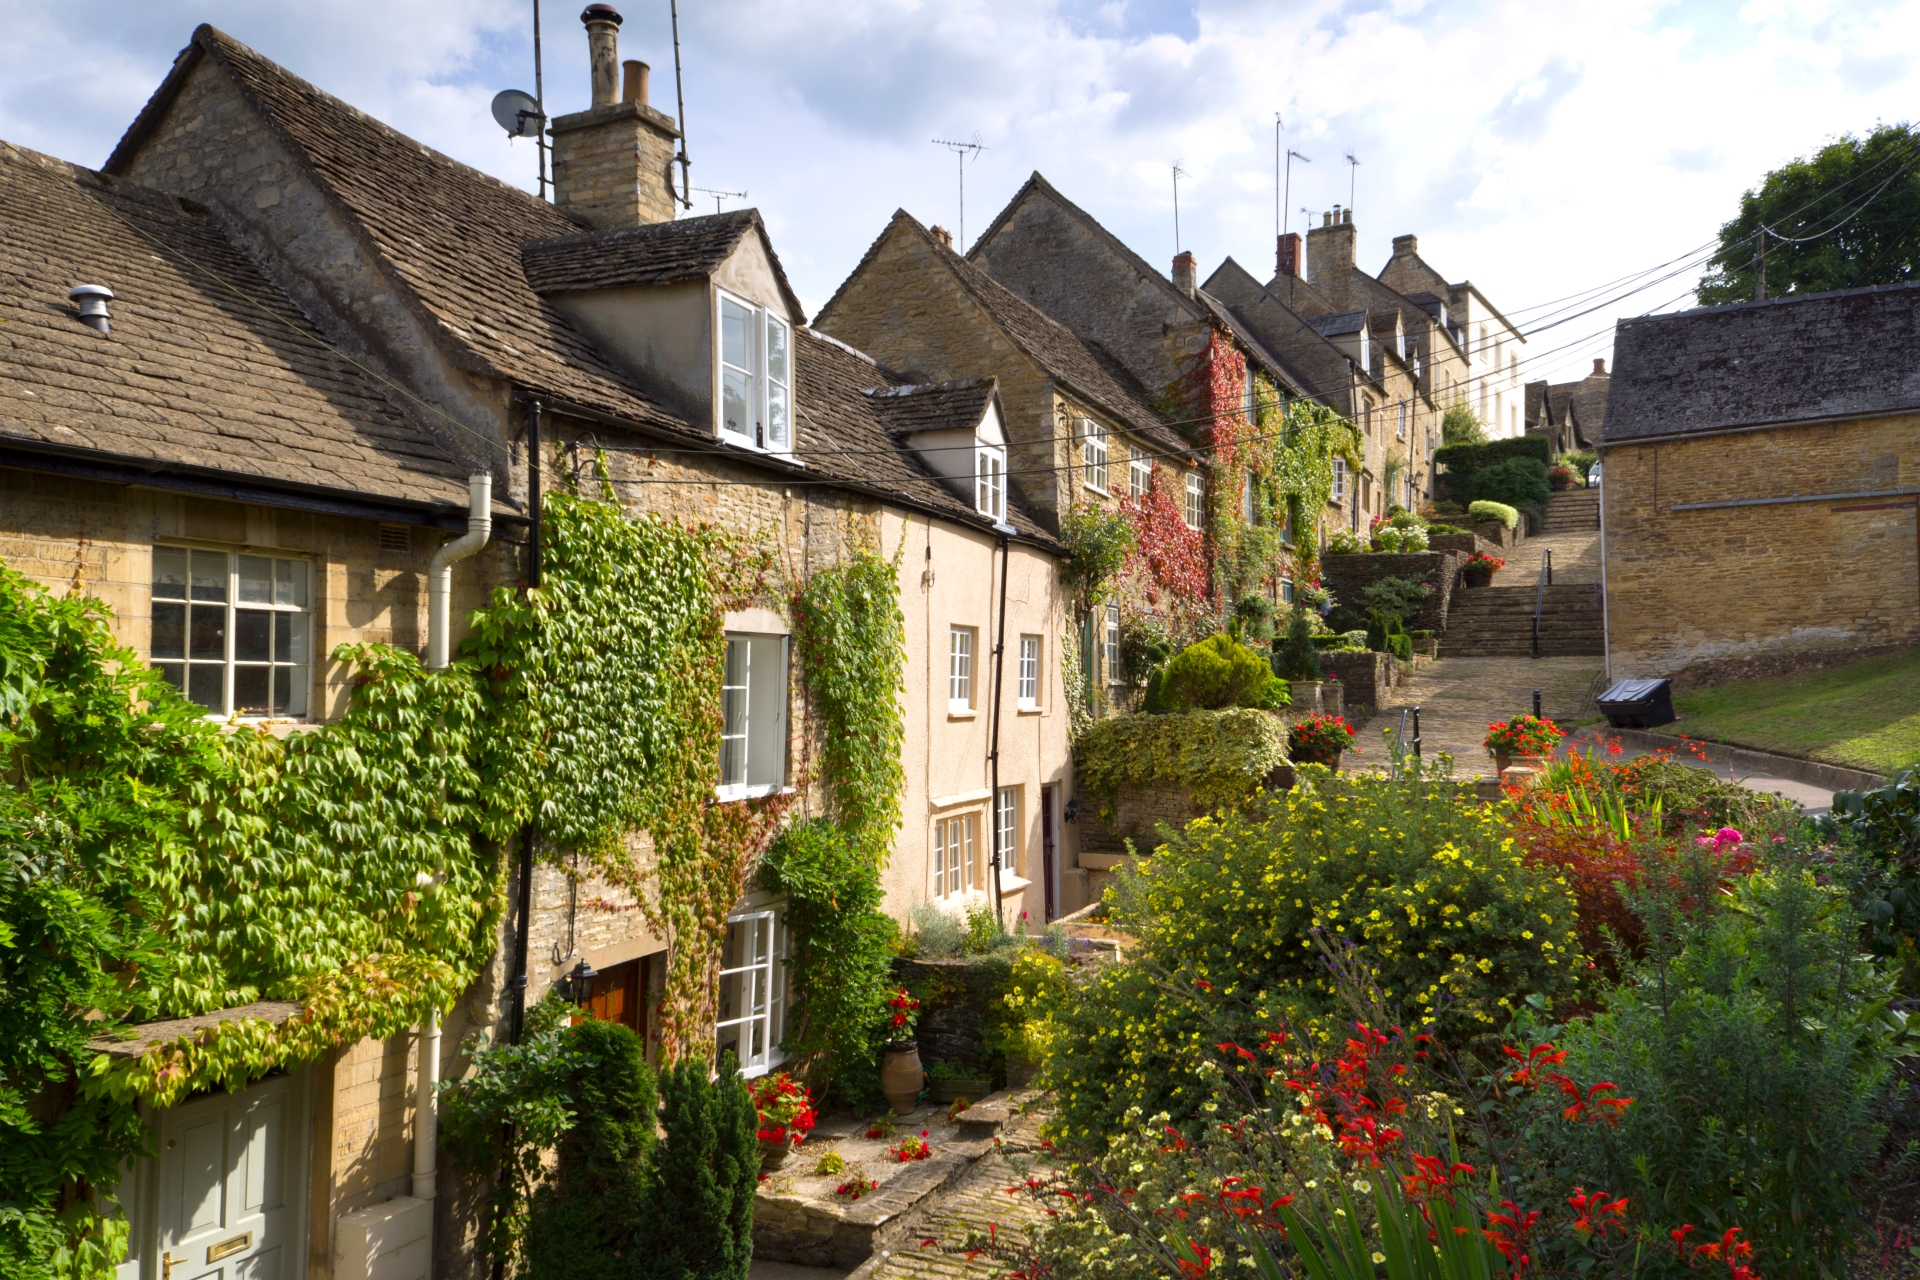 The Cotswolds - Classic England